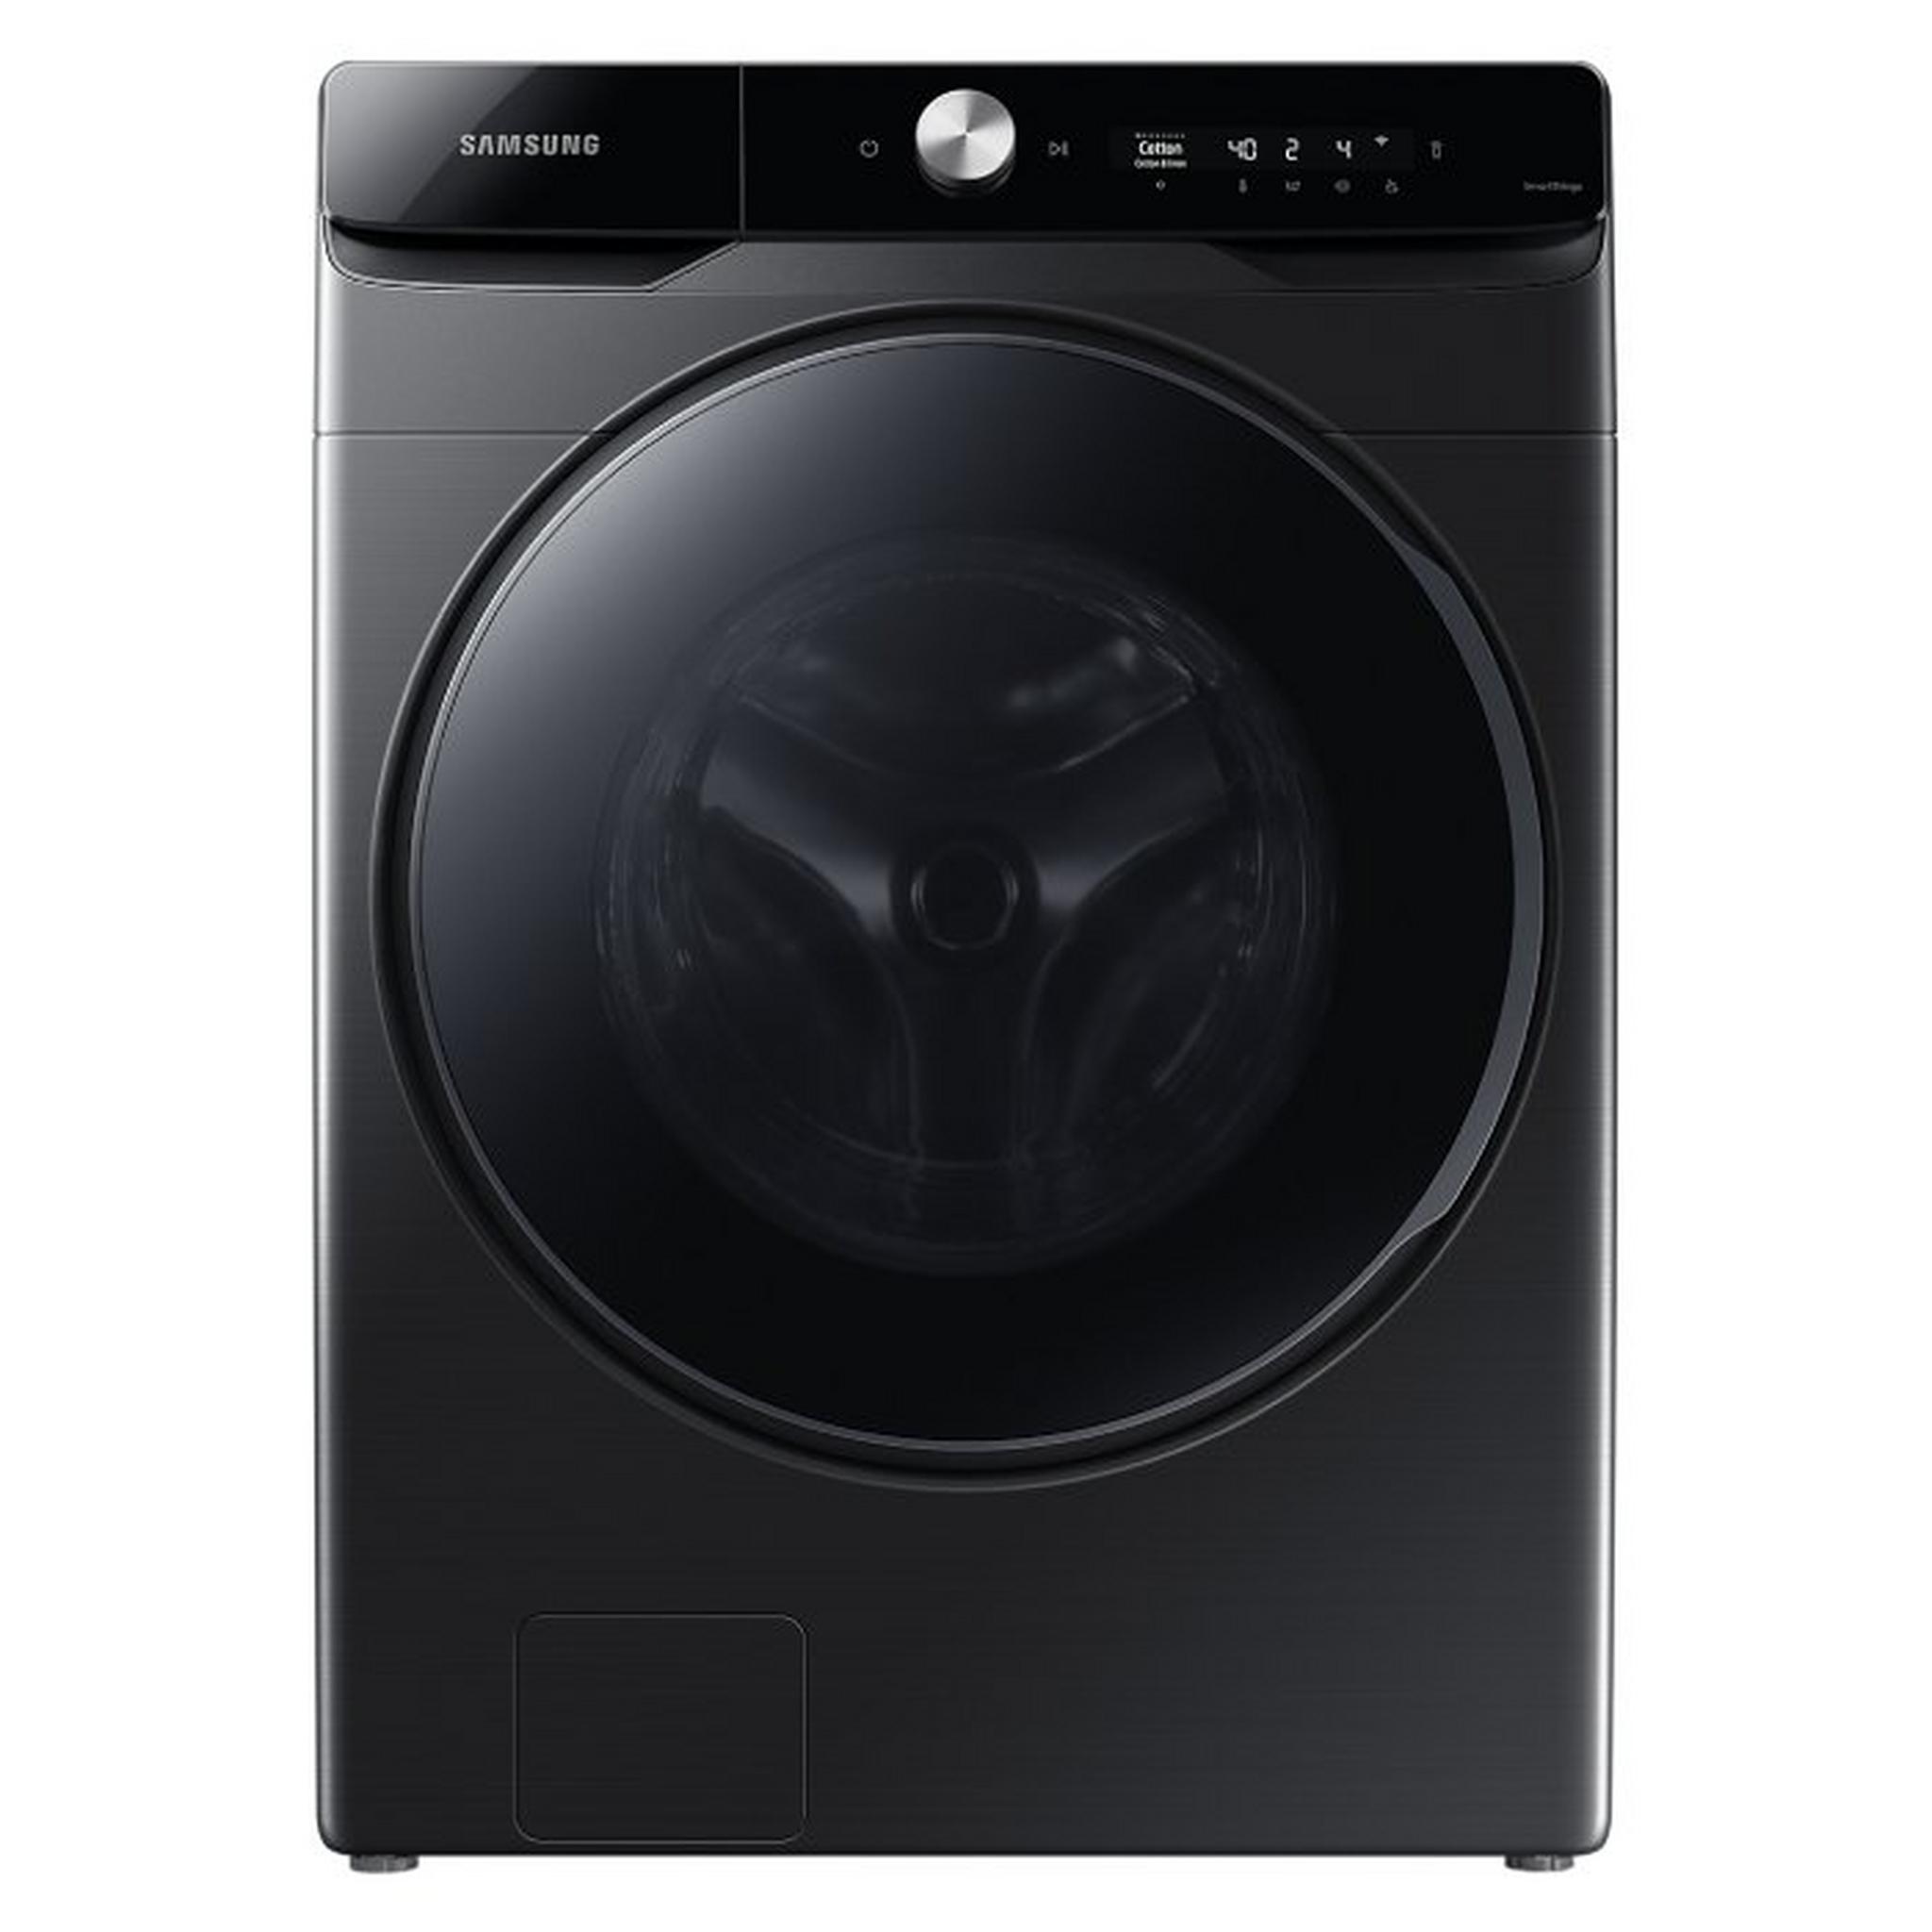 Samsung Front Load Washer/Dryer21 kg Washing Capacity and 12 Kg Drying Capacity WD21T6300GV - Black